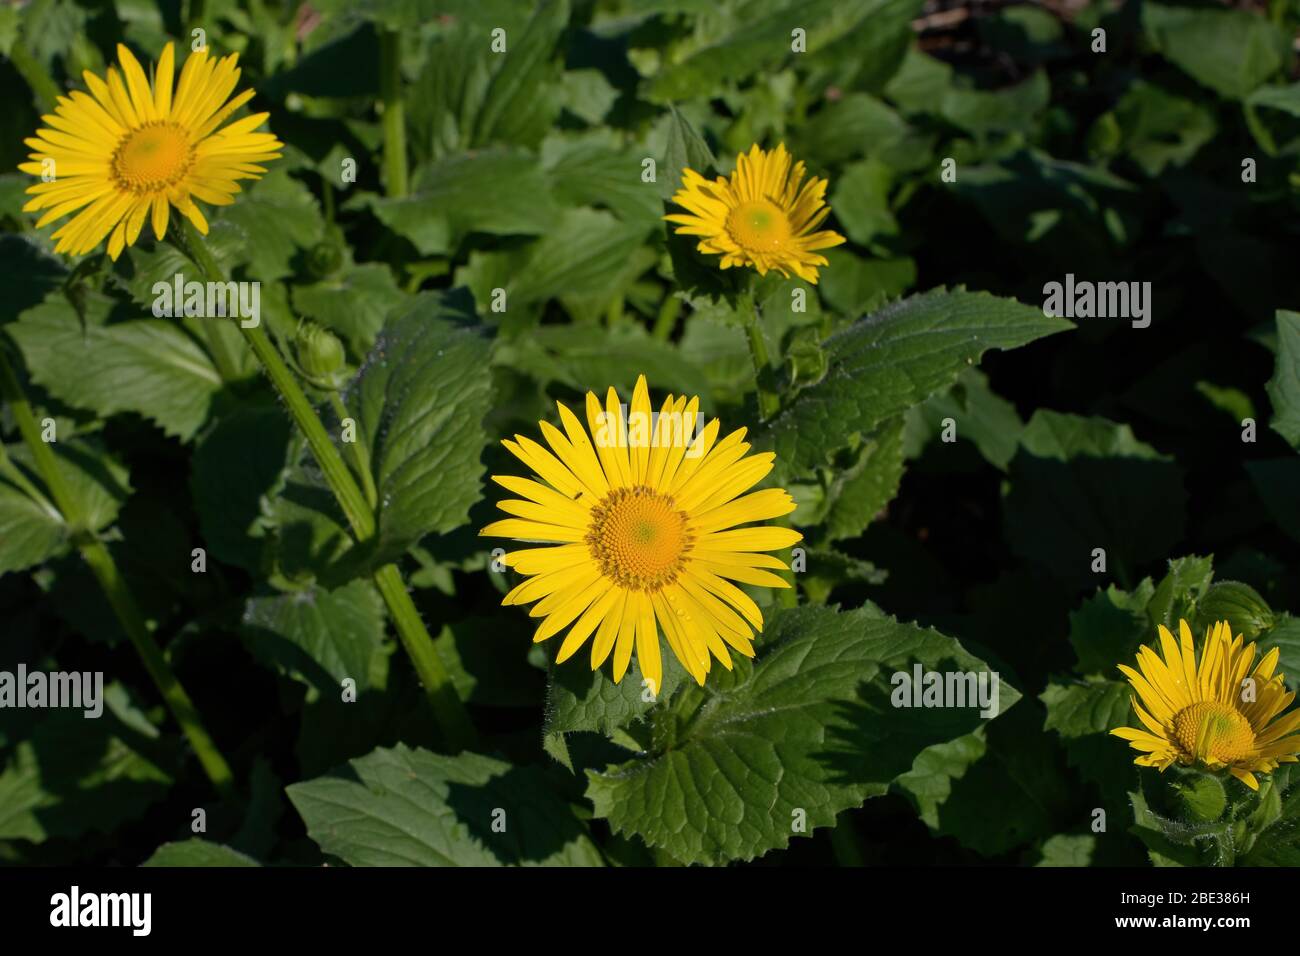 Leopards bane is a genus of flowering plants in the sunflower family. It is herbaceous perennial native to Europe and southwest Asia Stock Photo